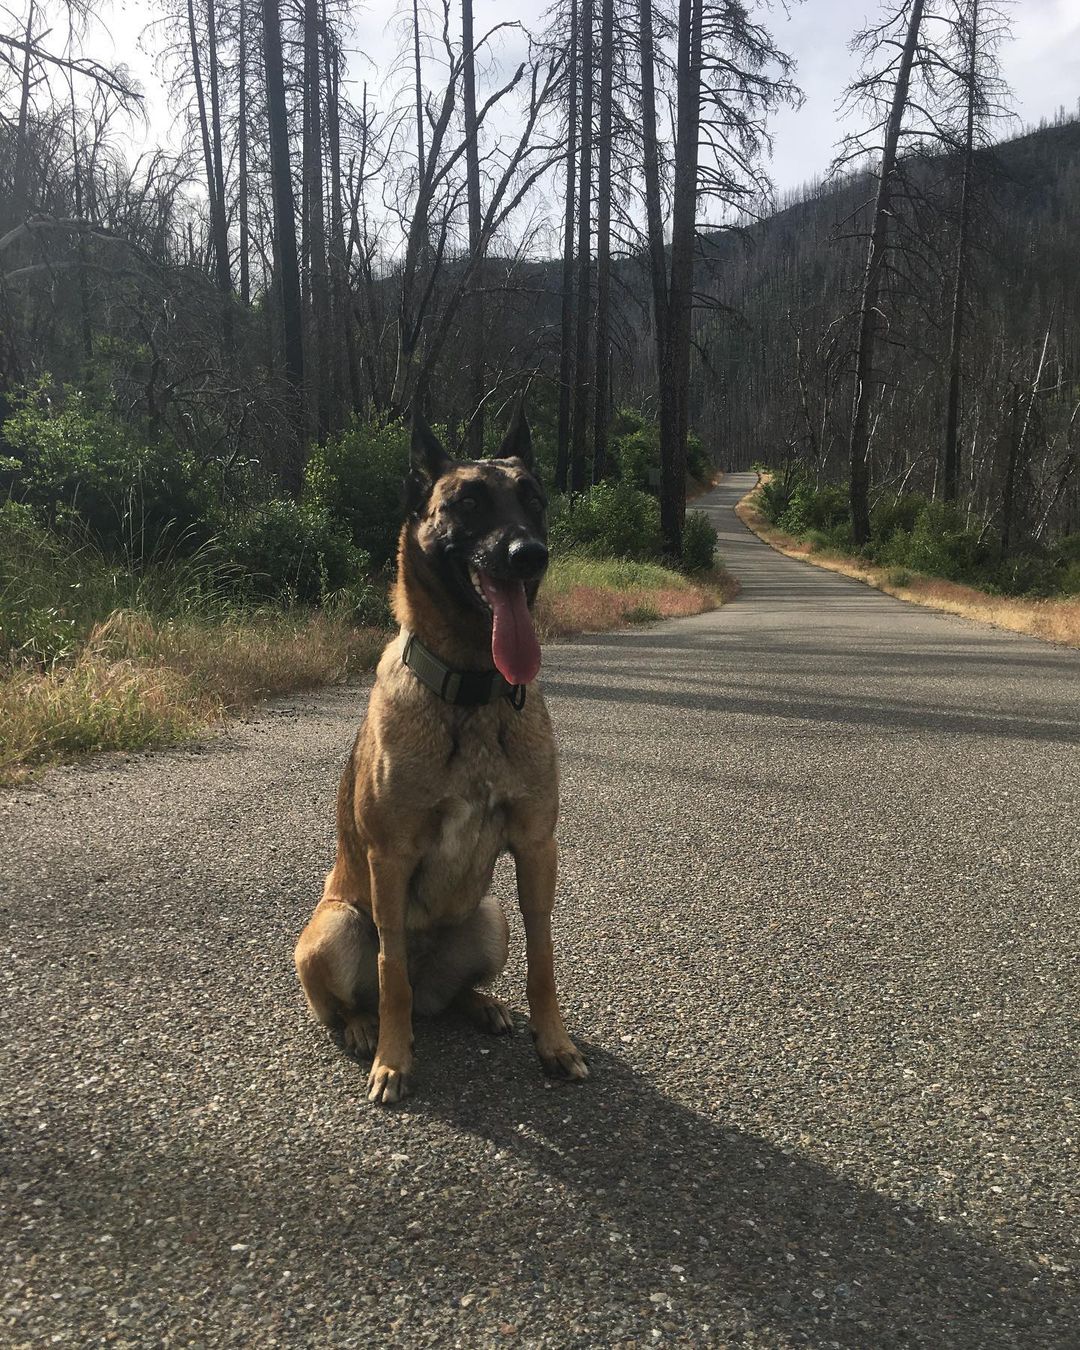 Hero dog saves her owner from mountain lion attack